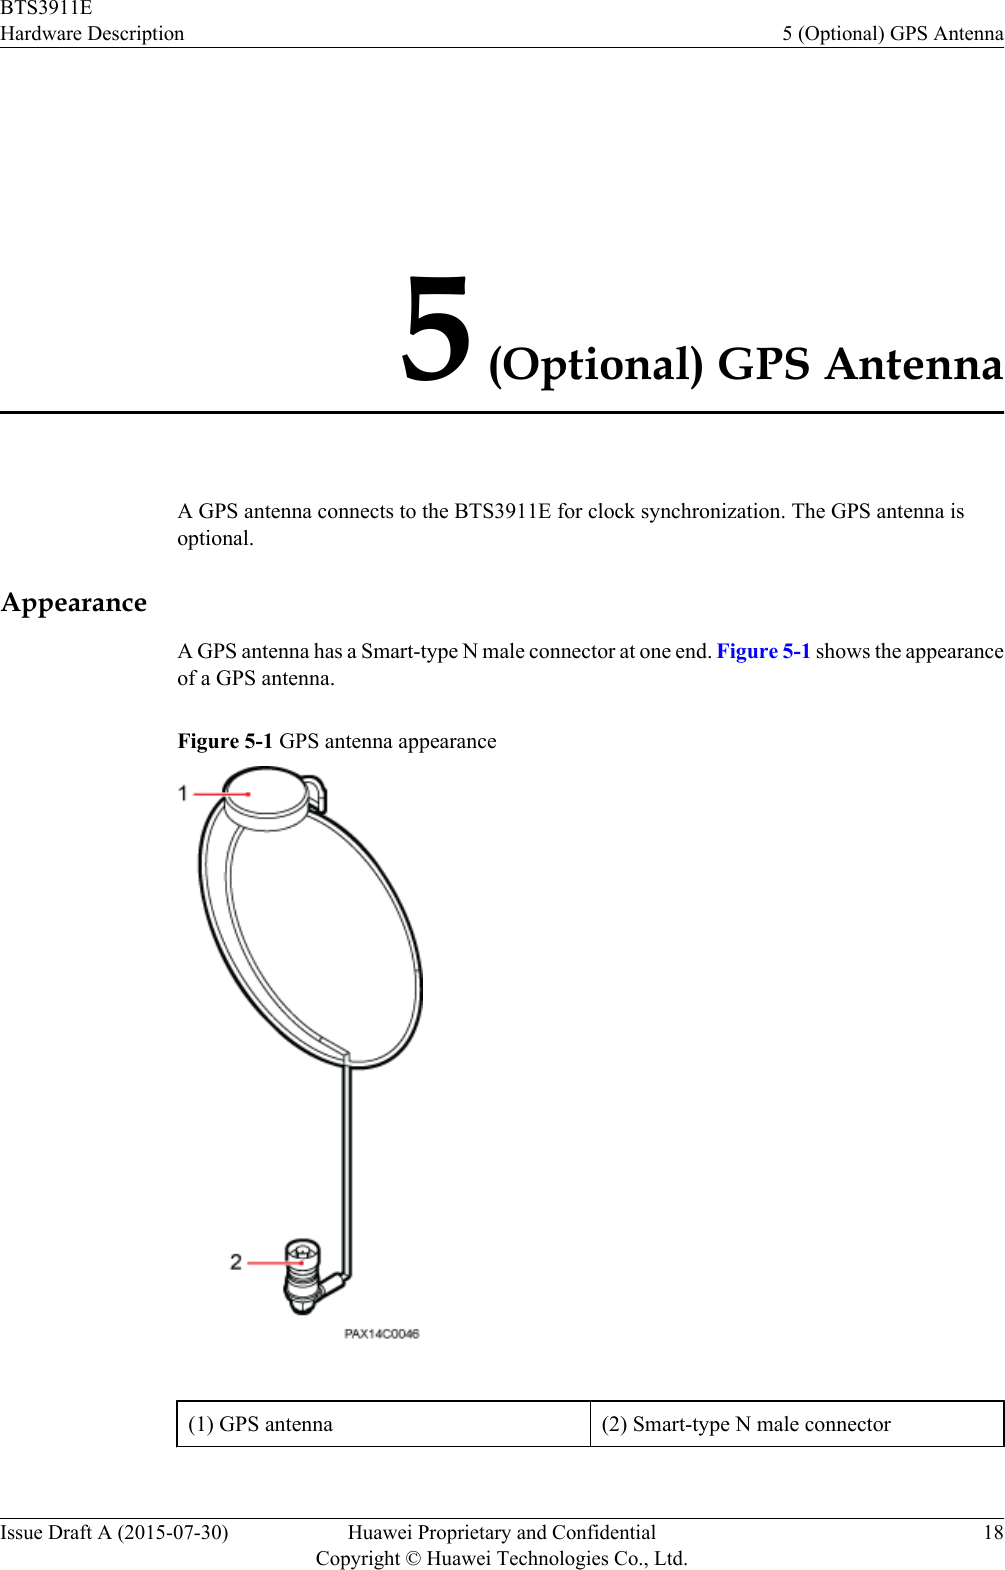 5 (Optional) GPS AntennaA GPS antenna connects to the BTS3911E for clock synchronization. The GPS antenna isoptional.AppearanceA GPS antenna has a Smart-type N male connector at one end. Figure 5-1 shows the appearanceof a GPS antenna.Figure 5-1 GPS antenna appearance(1) GPS antenna (2) Smart-type N male connector BTS3911EHardware Description 5 (Optional) GPS AntennaIssue Draft A (2015-07-30) Huawei Proprietary and ConfidentialCopyright © Huawei Technologies Co., Ltd.18